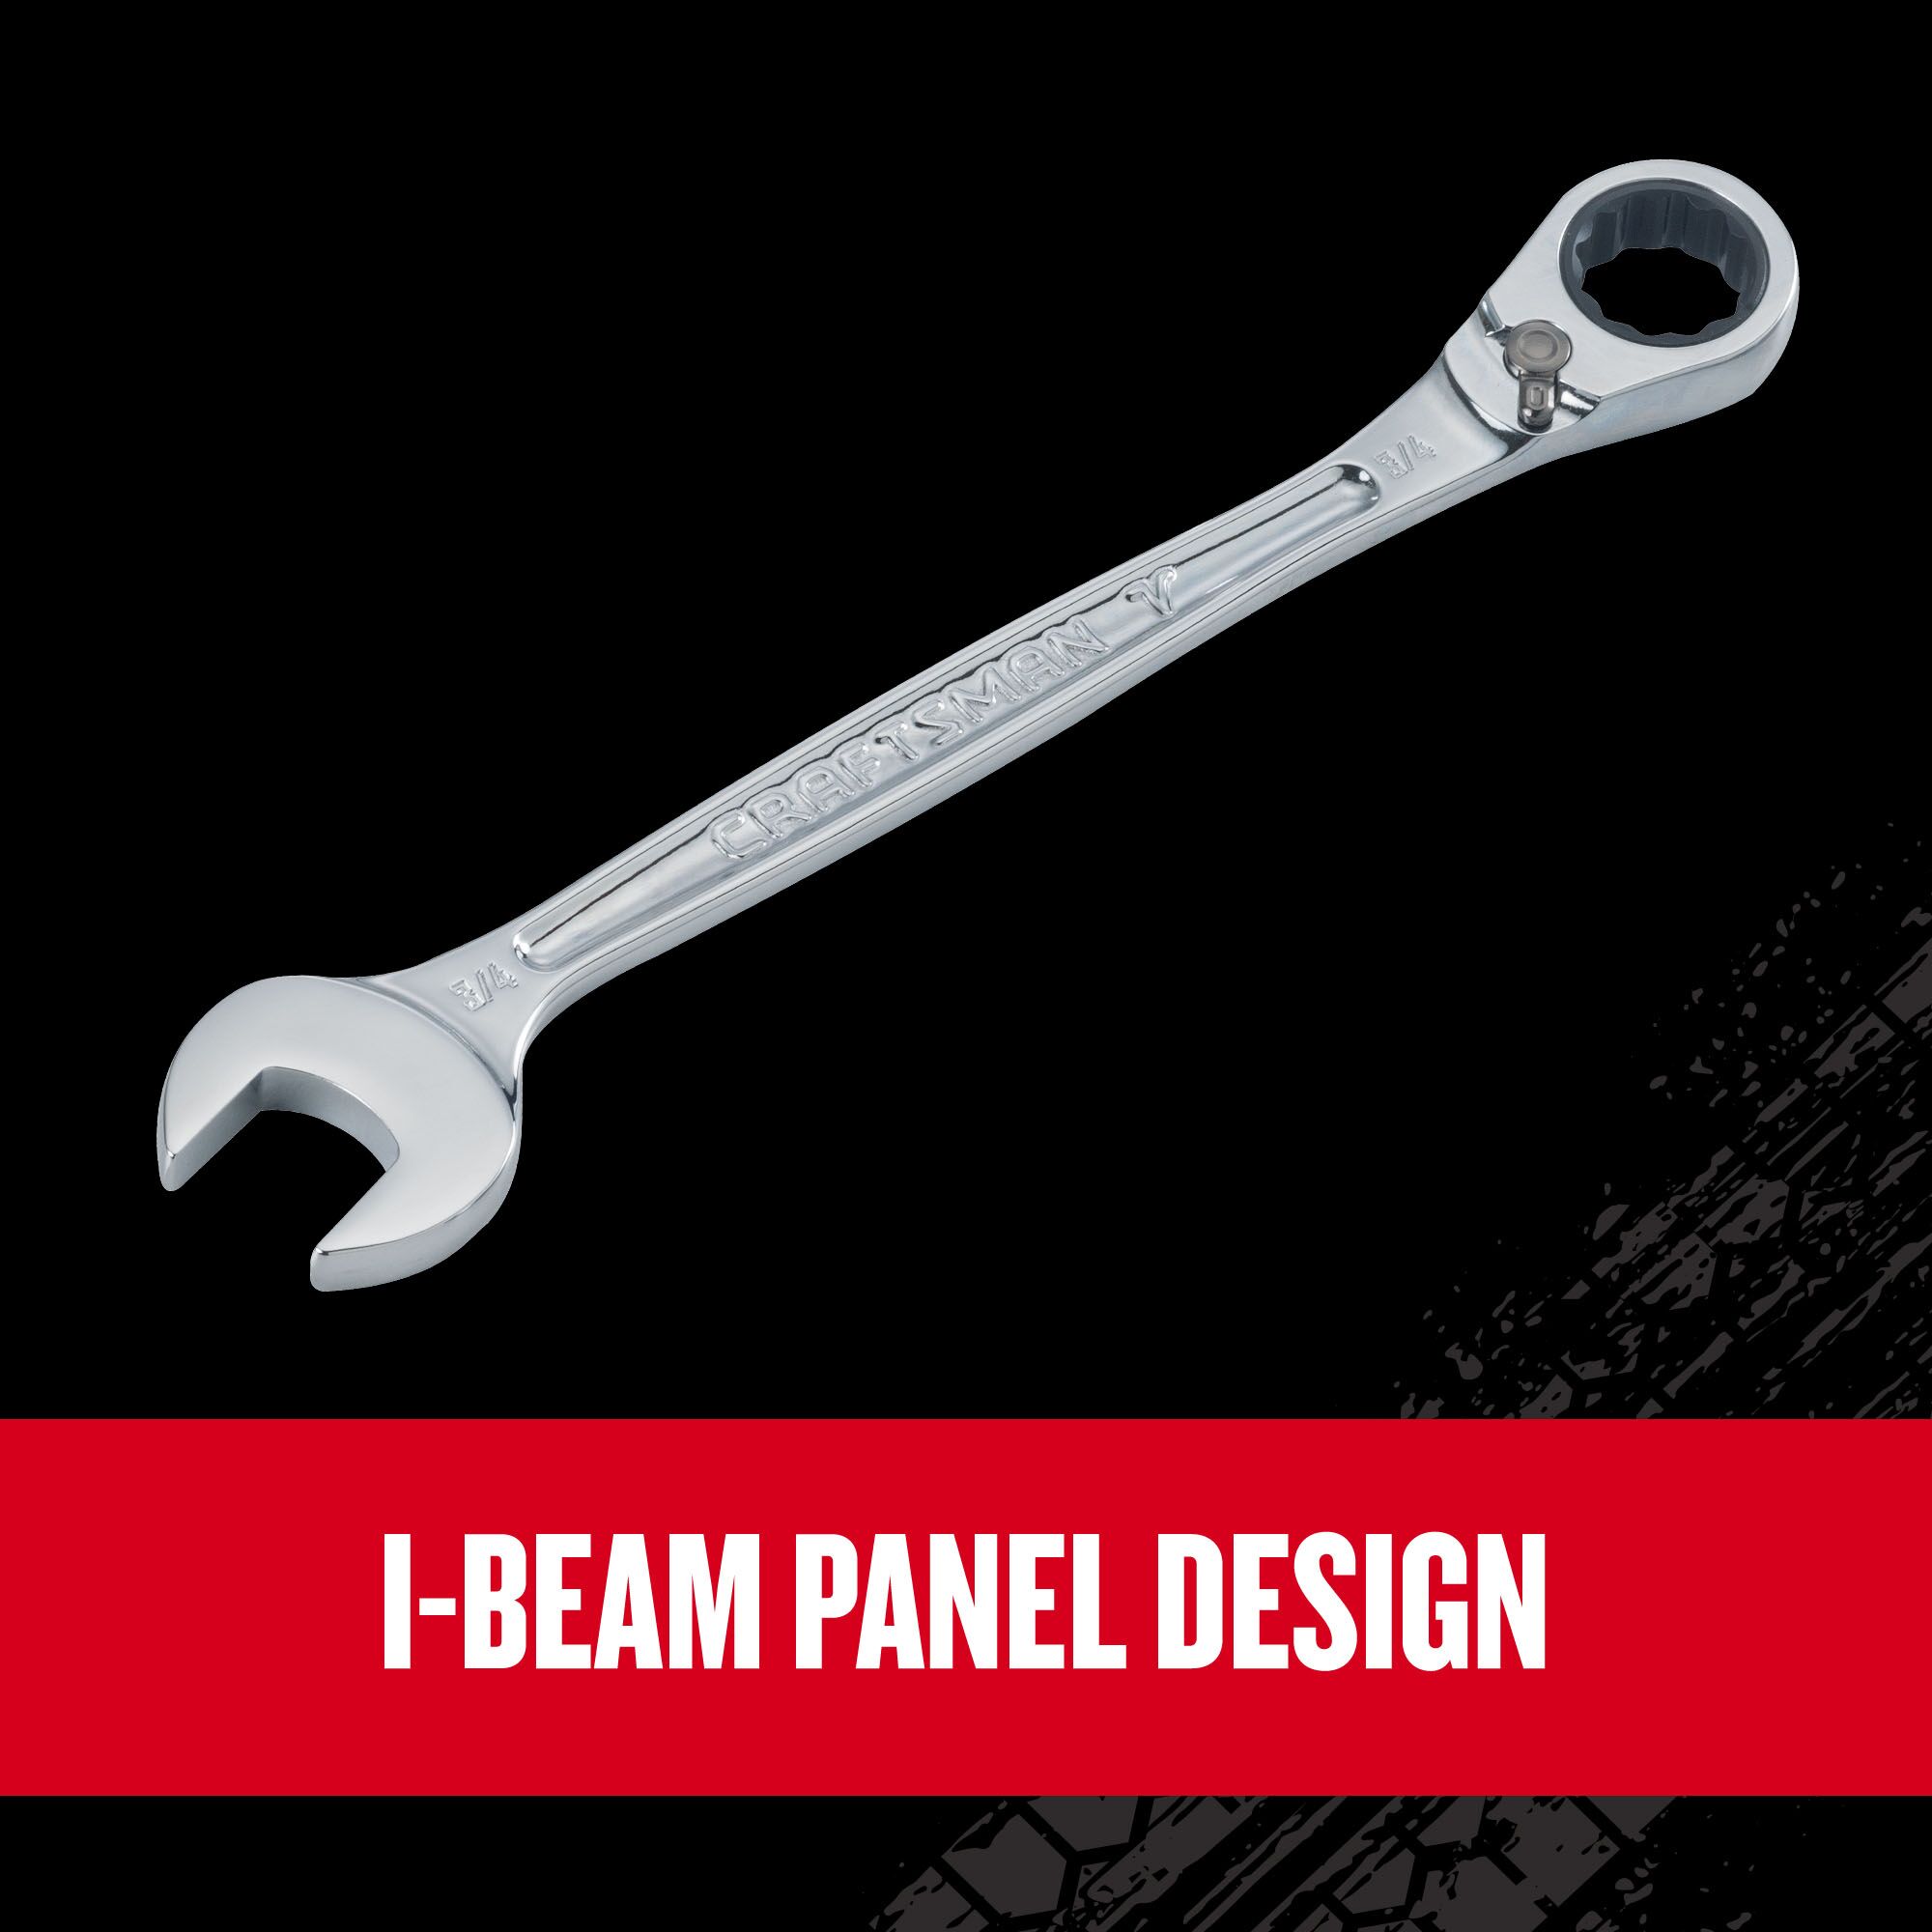 Graphic of CRAFTSMAN Wrenches: Ratchet highlighting product features